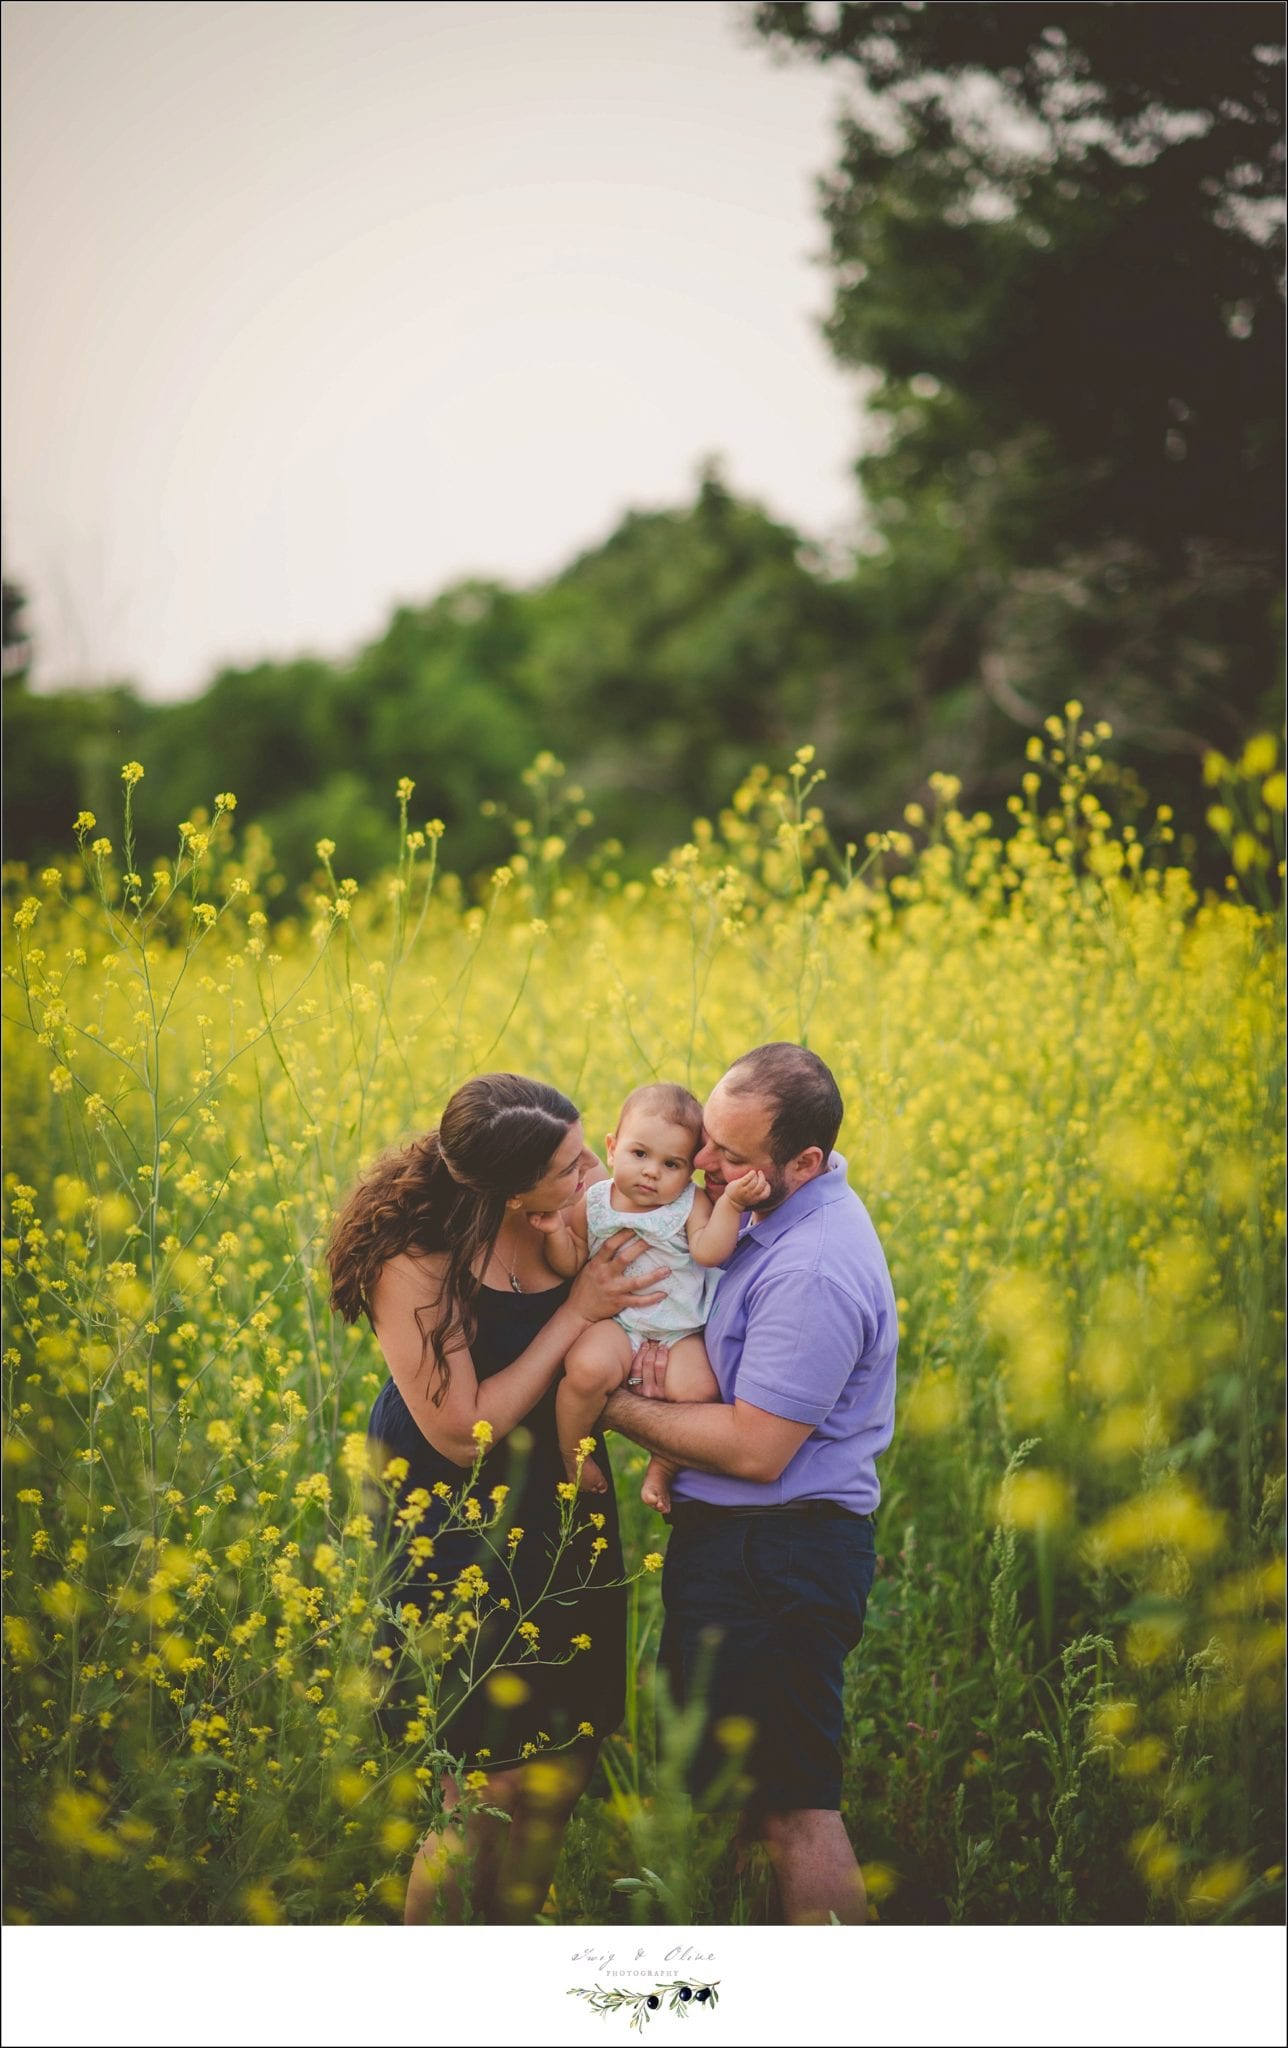 parents, yellow flowers, greenery, embrace, Twig and olive 